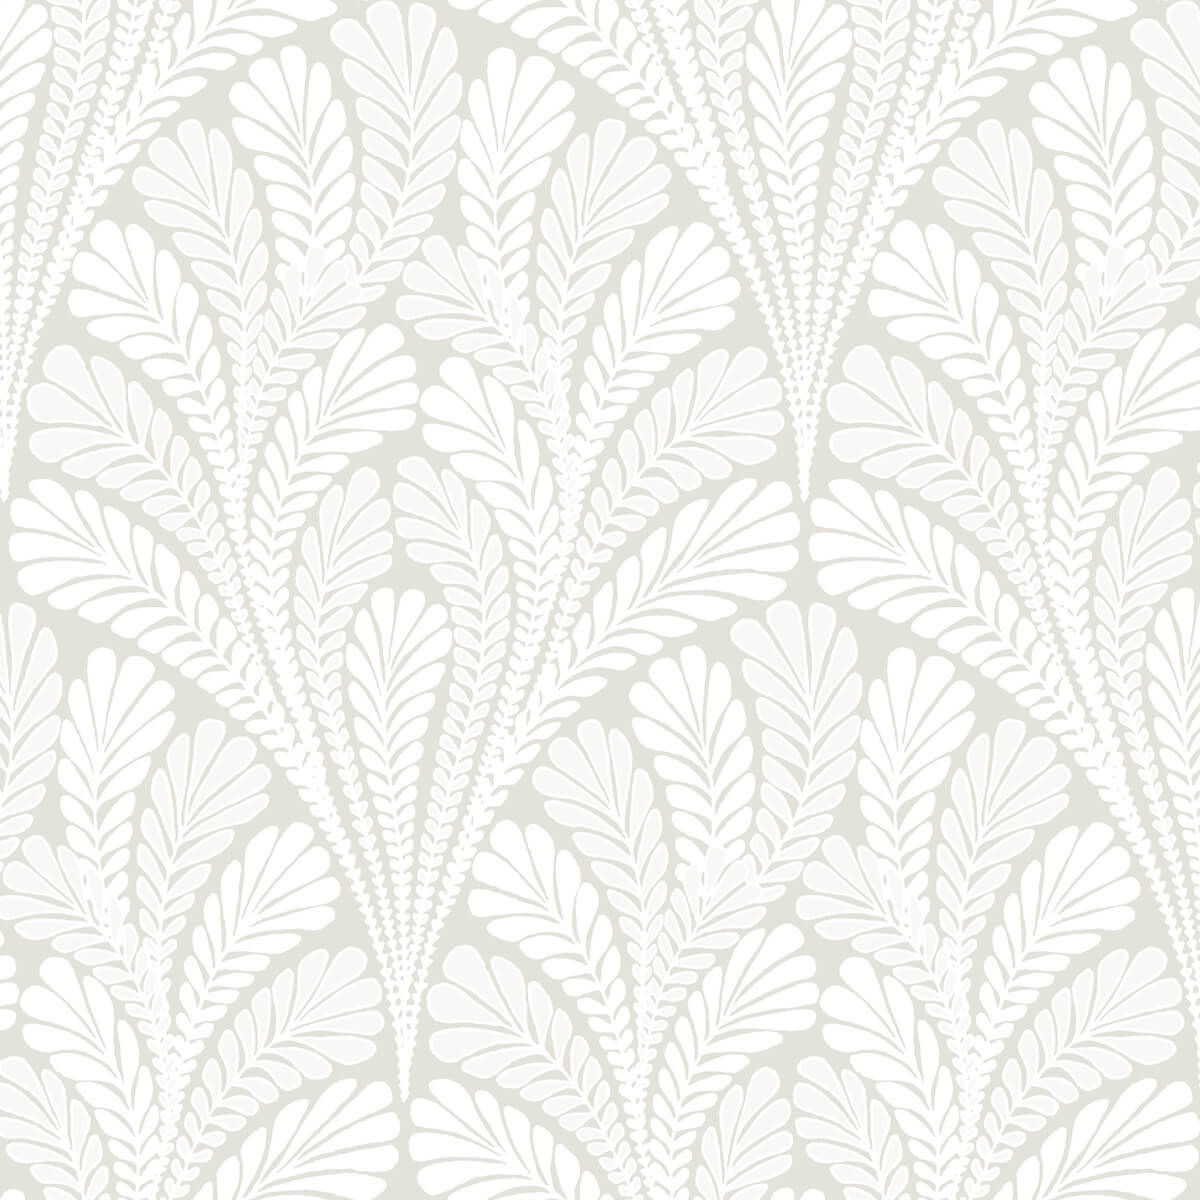 Black & White Resource Library Shell Damask Wallpaper - Cream & Pearl